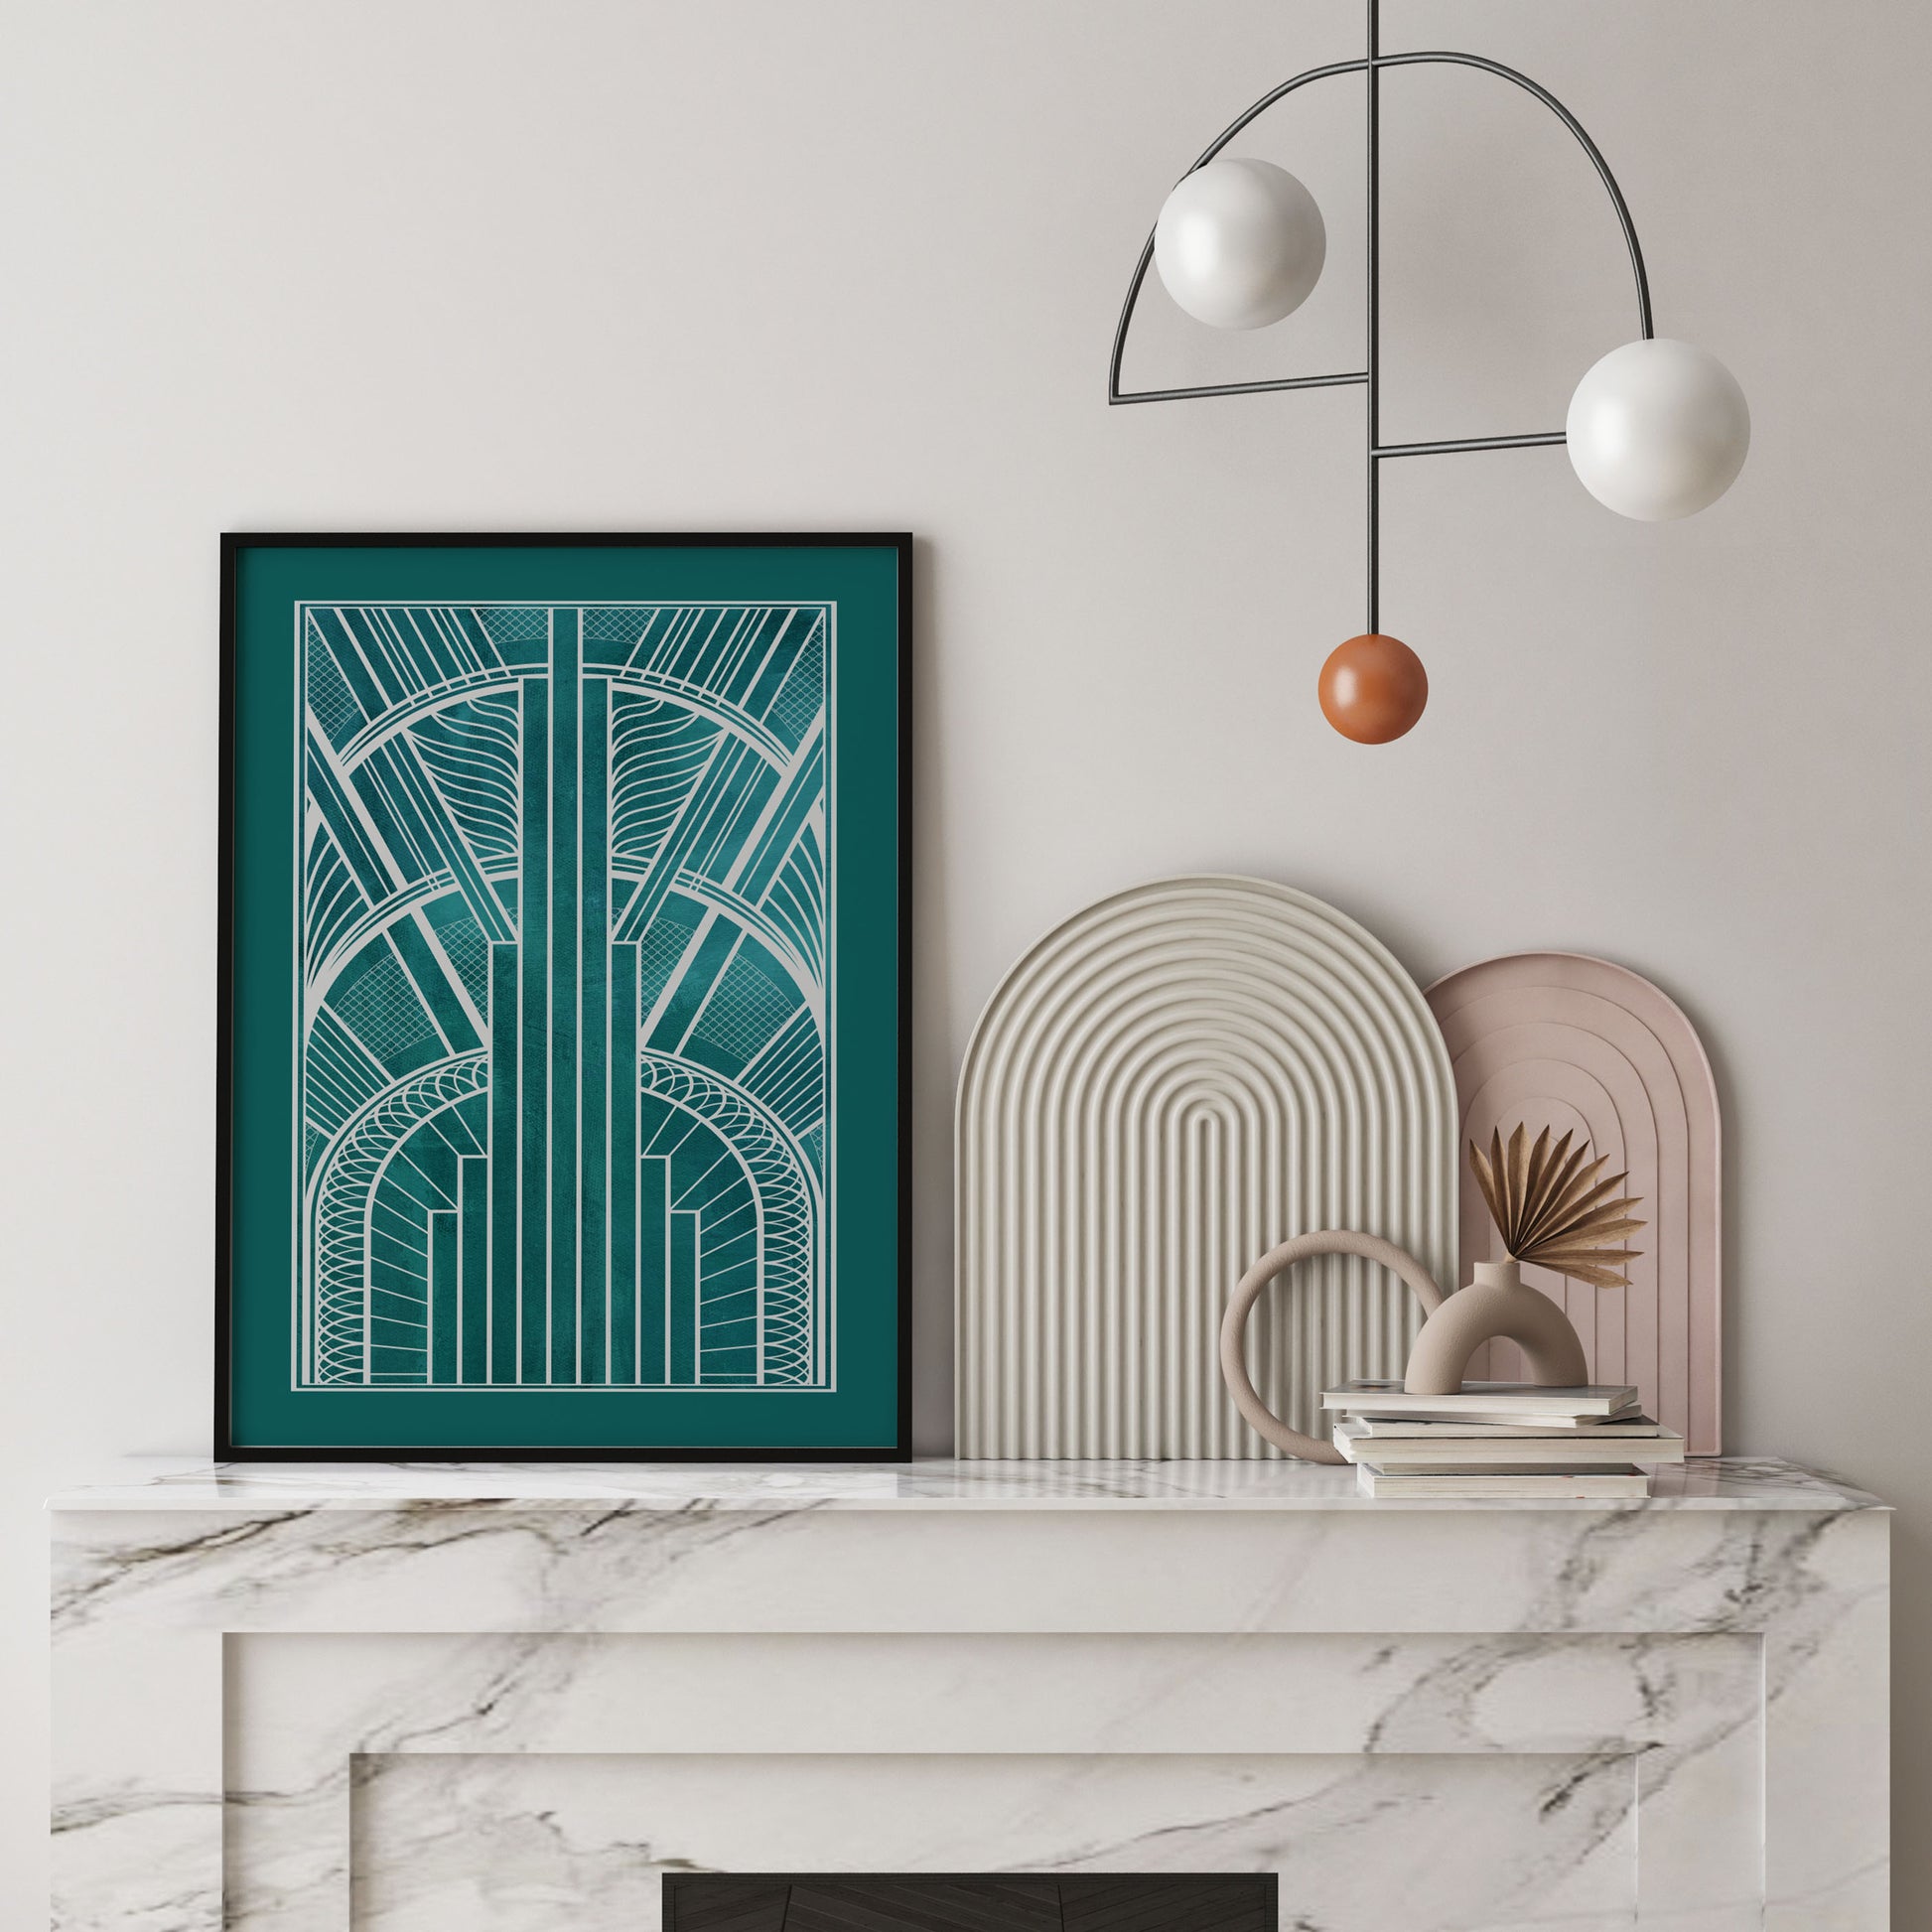 Teal art deco wall art print with silver detail